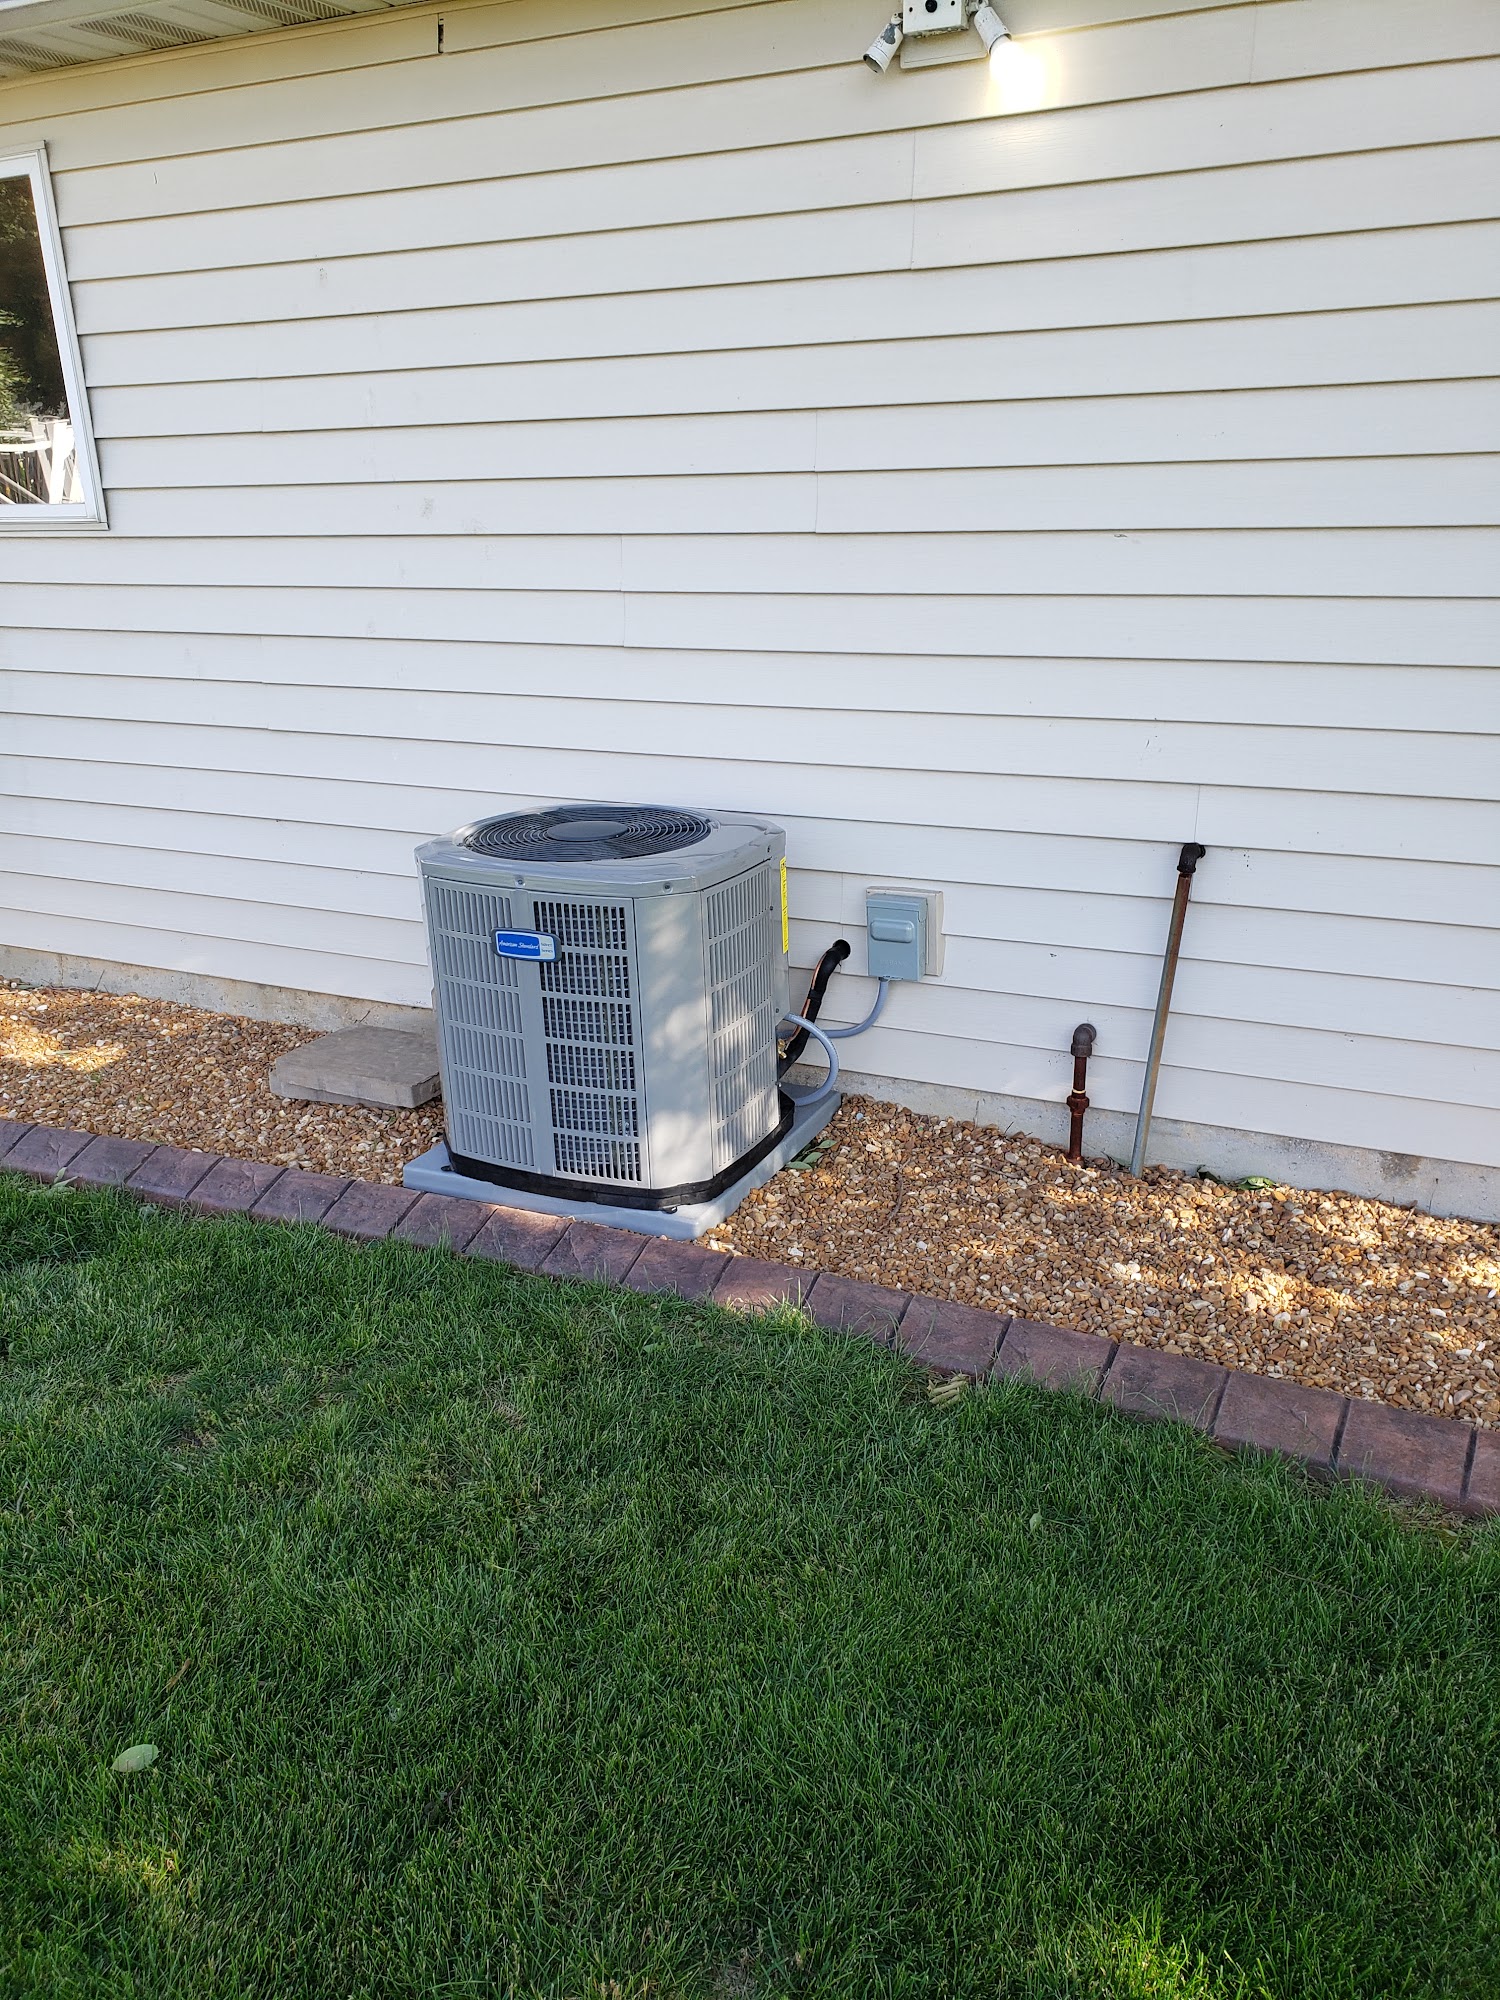 A-1 Heating And Cooling 7225 E Scully Rd, Gardner Illinois 60424